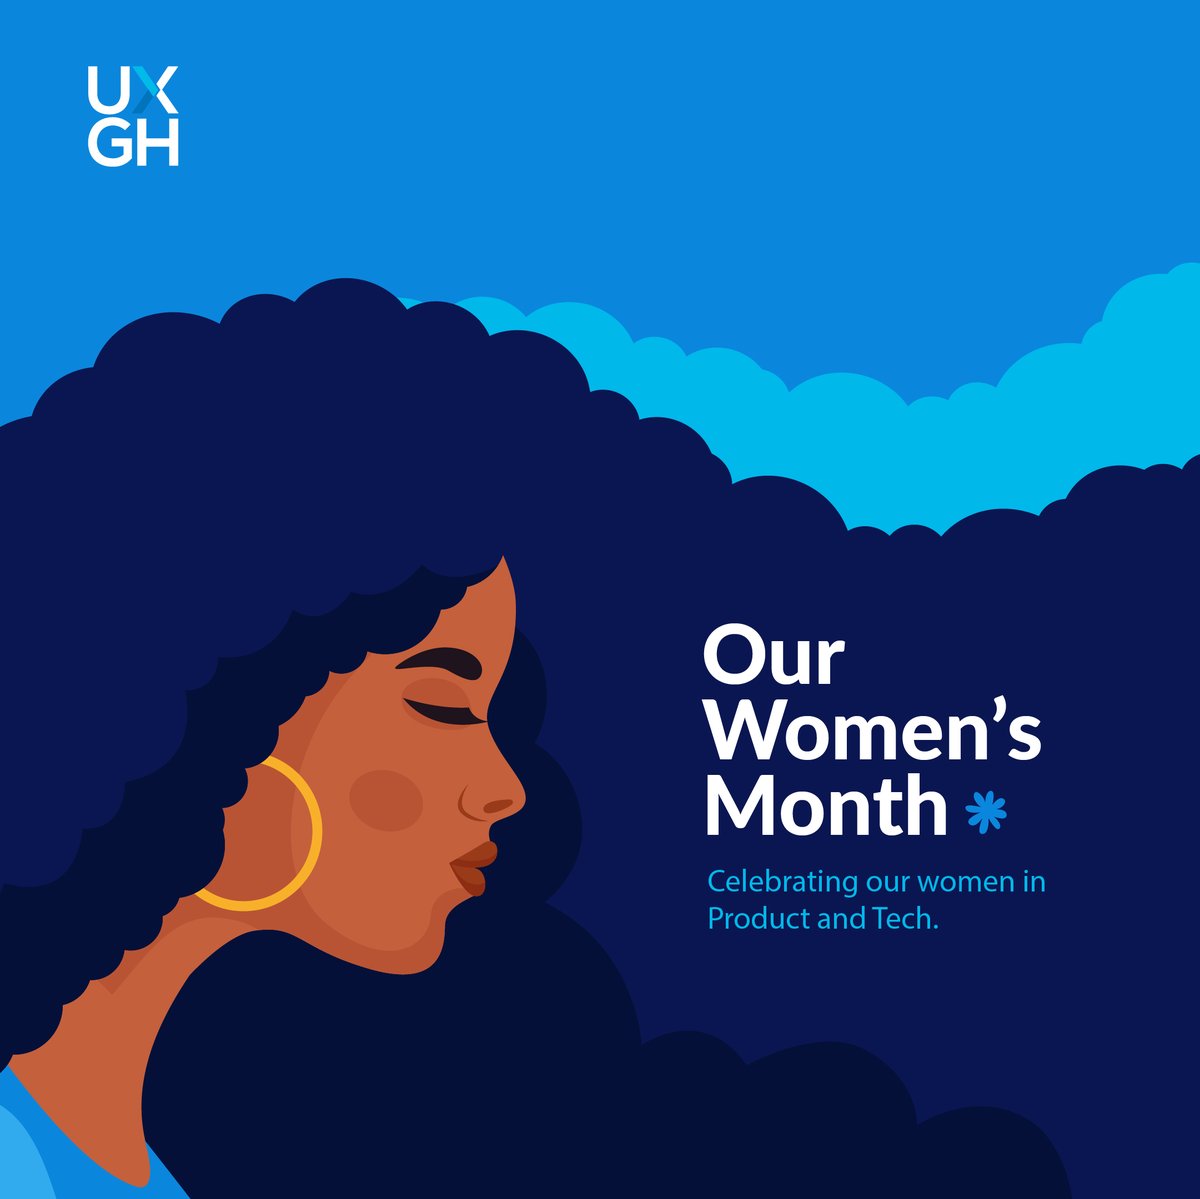 Happy International Workers' Day and a special shutout to all the amazing women in UX Design! This #May we're celebrating women contributions to UX Design with a series of webinars. Stay tuned to learn from inspiring women! #UXGhanaWomensMonth #UXGhana #UXDesigners #UXDesign